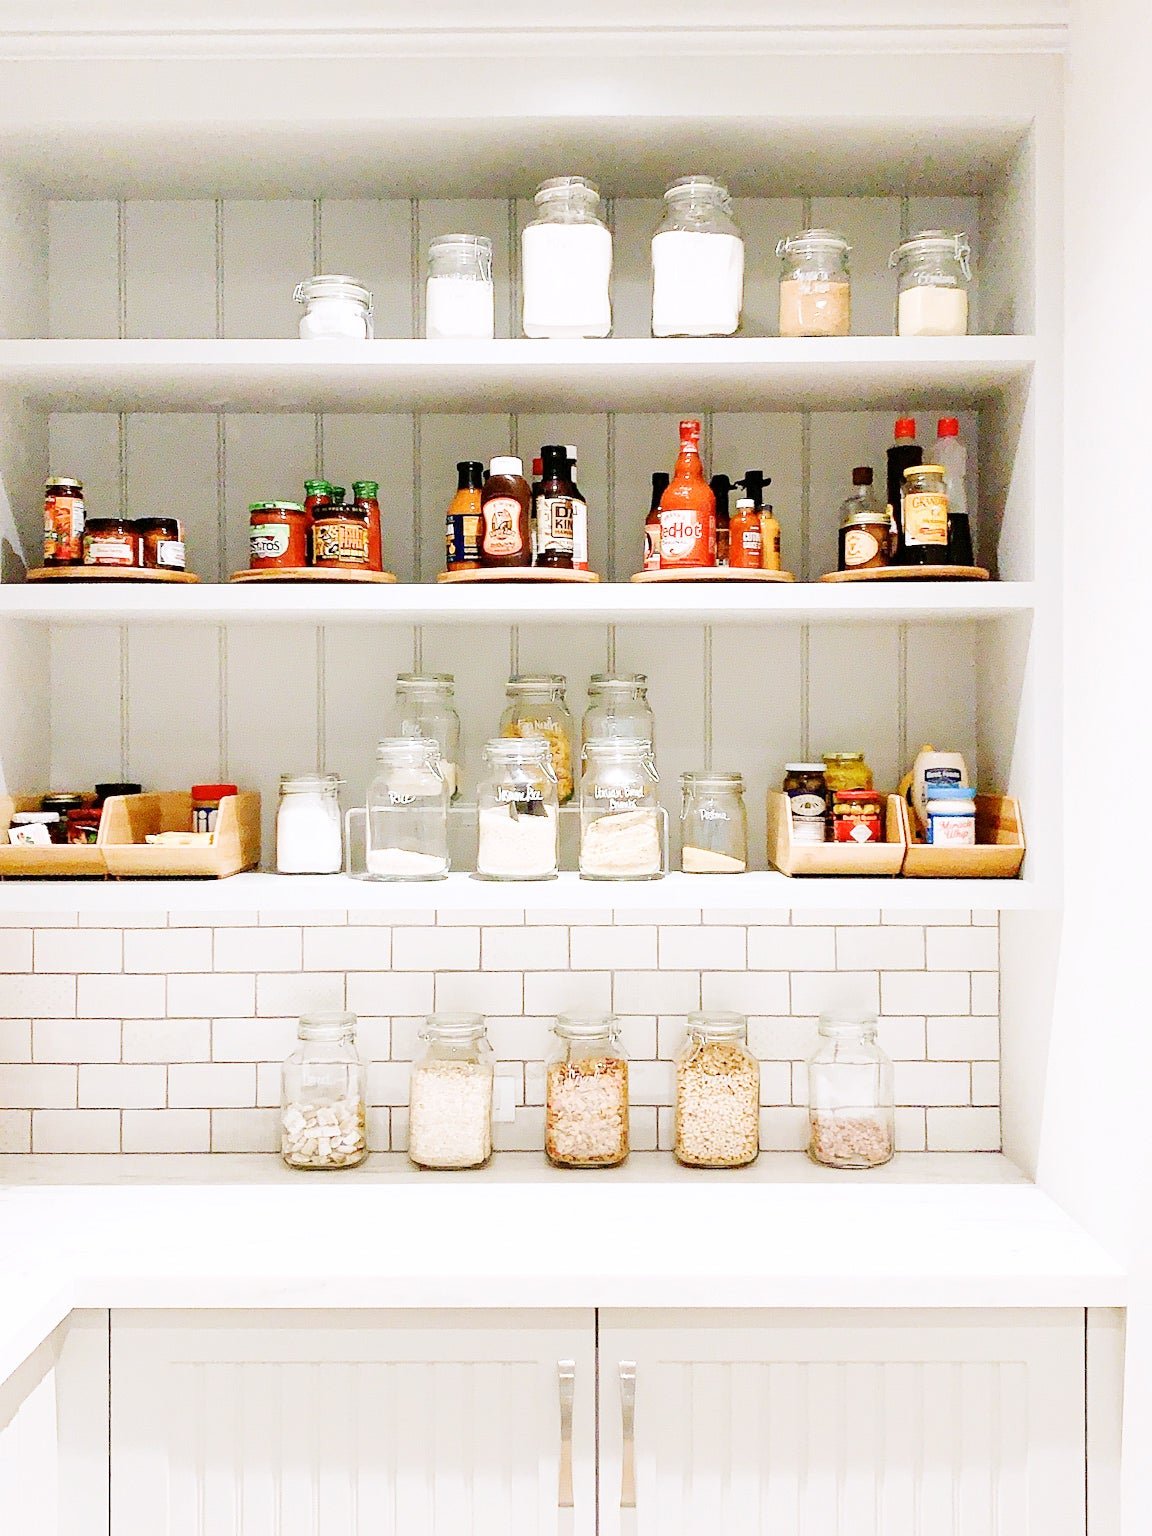 7 Kitchen Organization Hacks That Make the Most of the Storage You Have